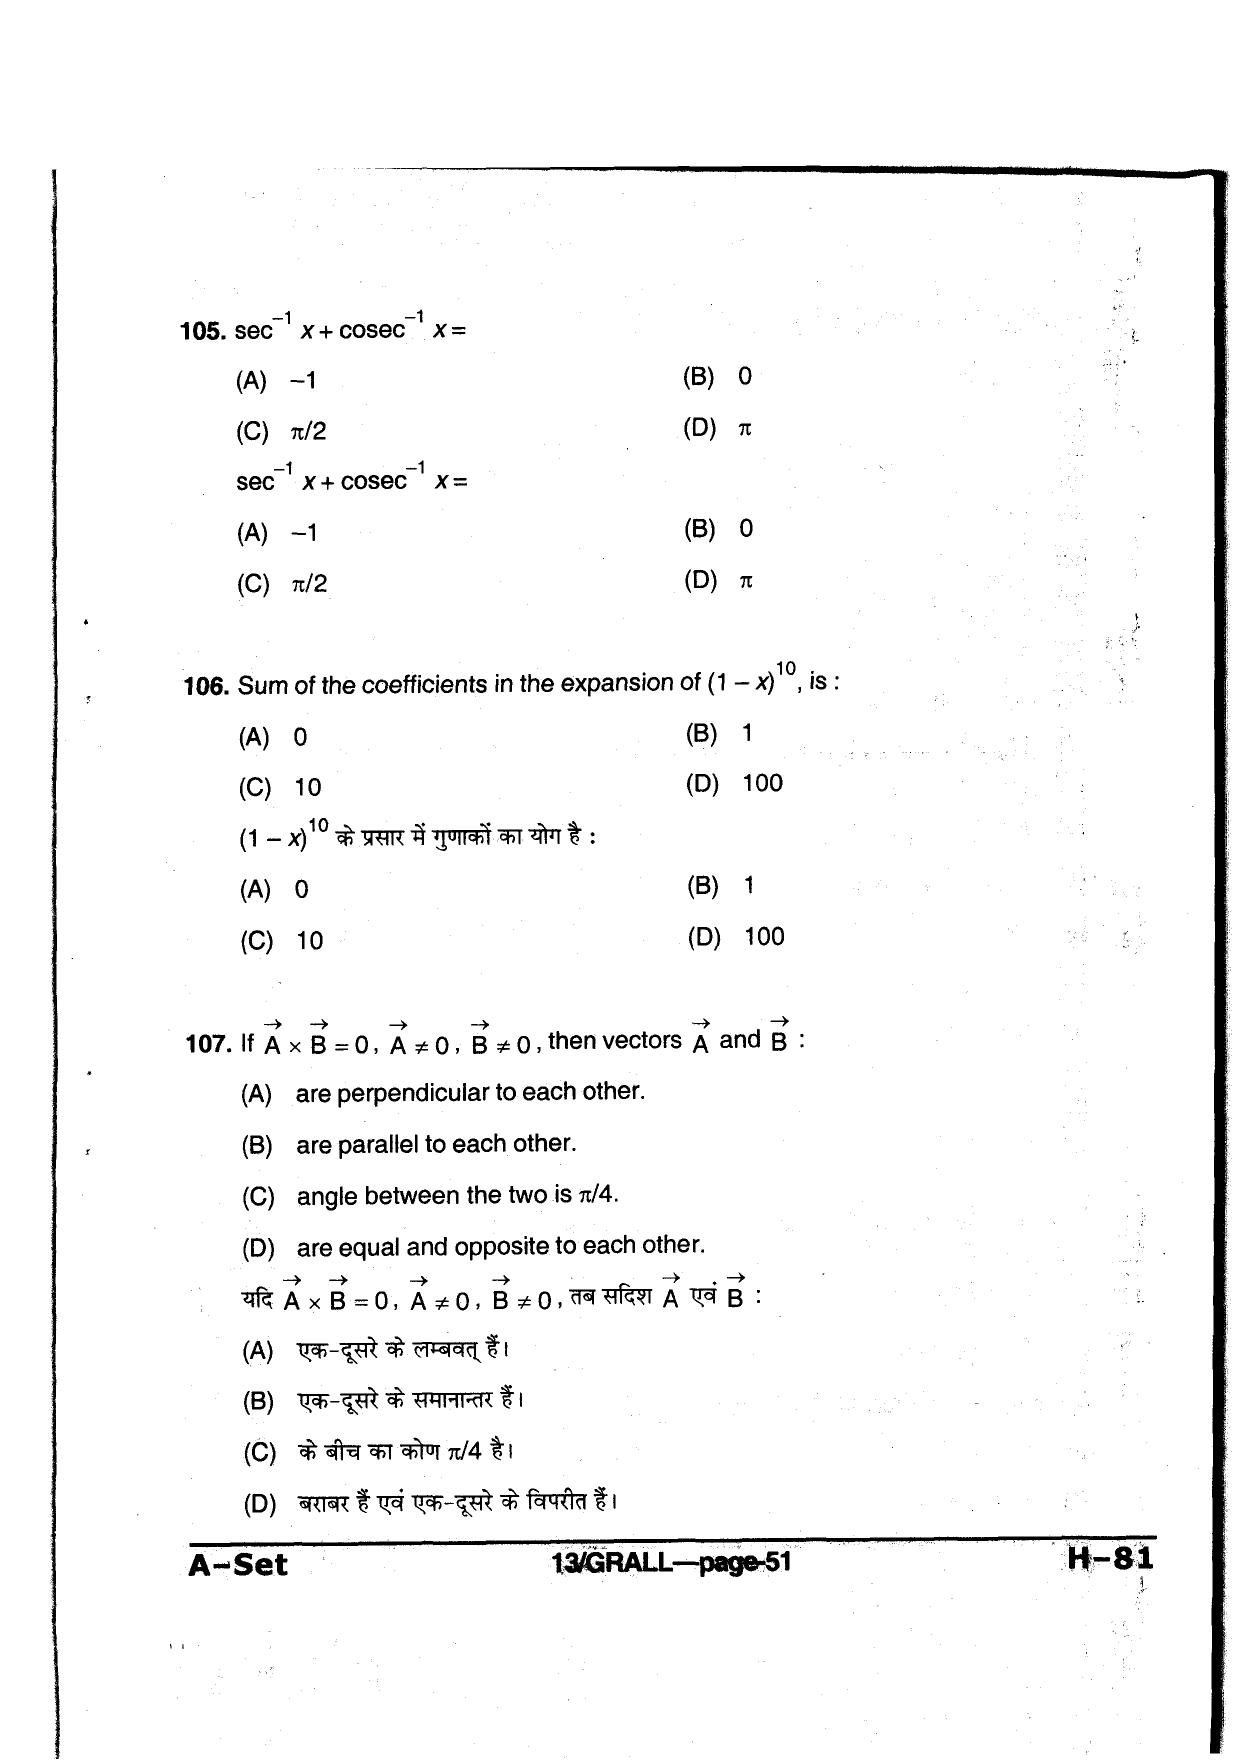 MP PAT 2013 Question Paper - Paper I - Page 51